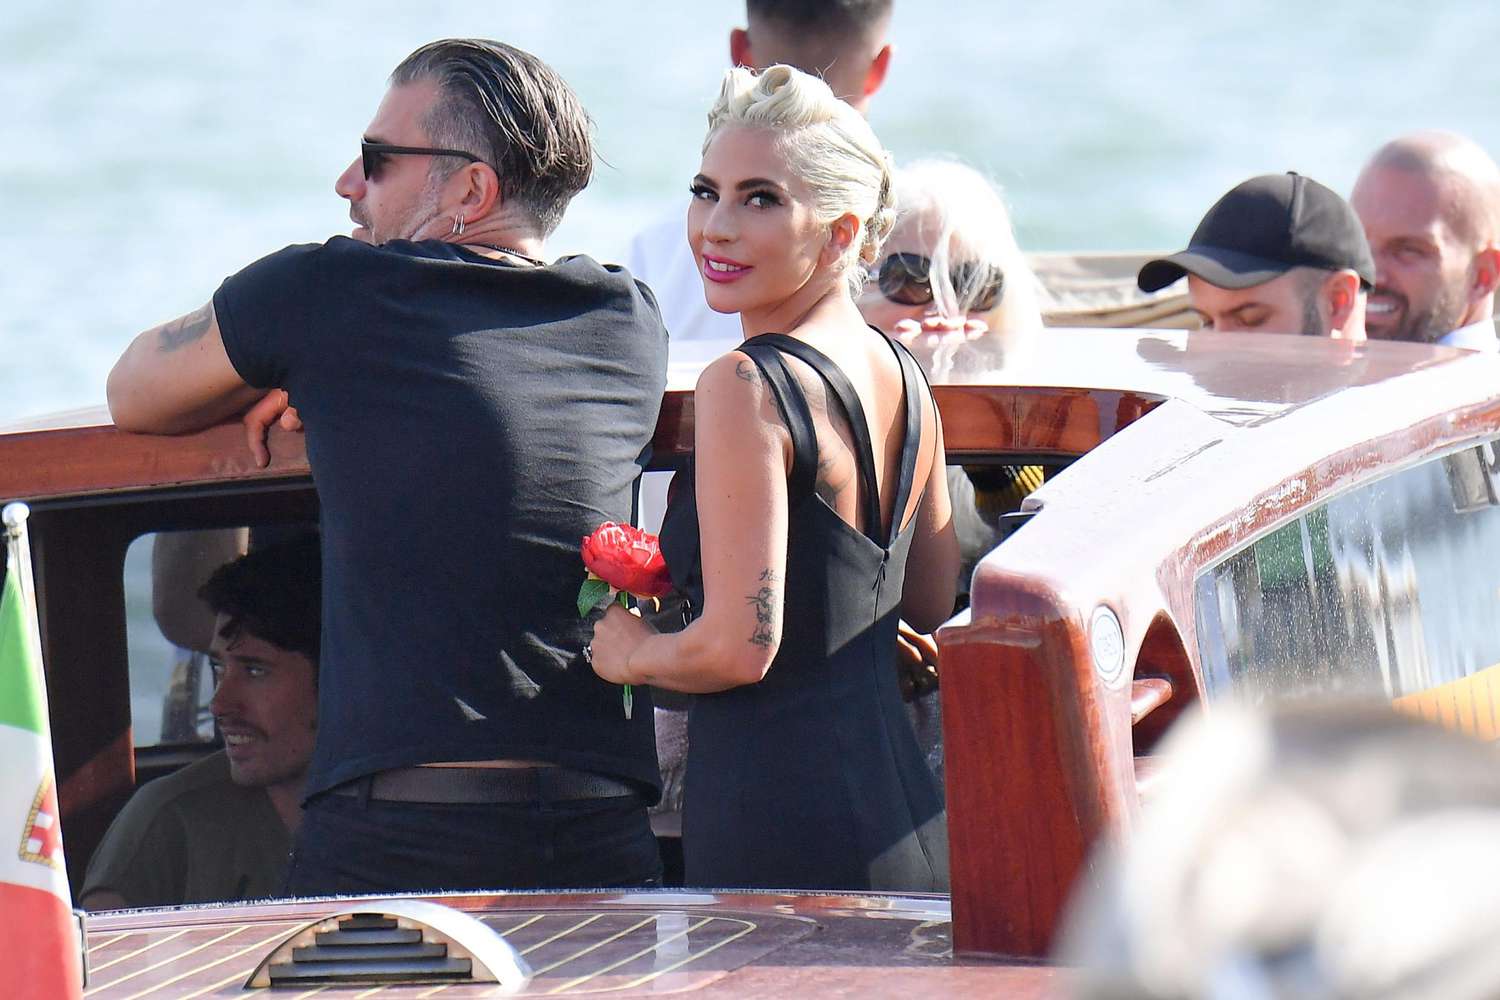 Leaked lady gaga rides the boat during venice film festival